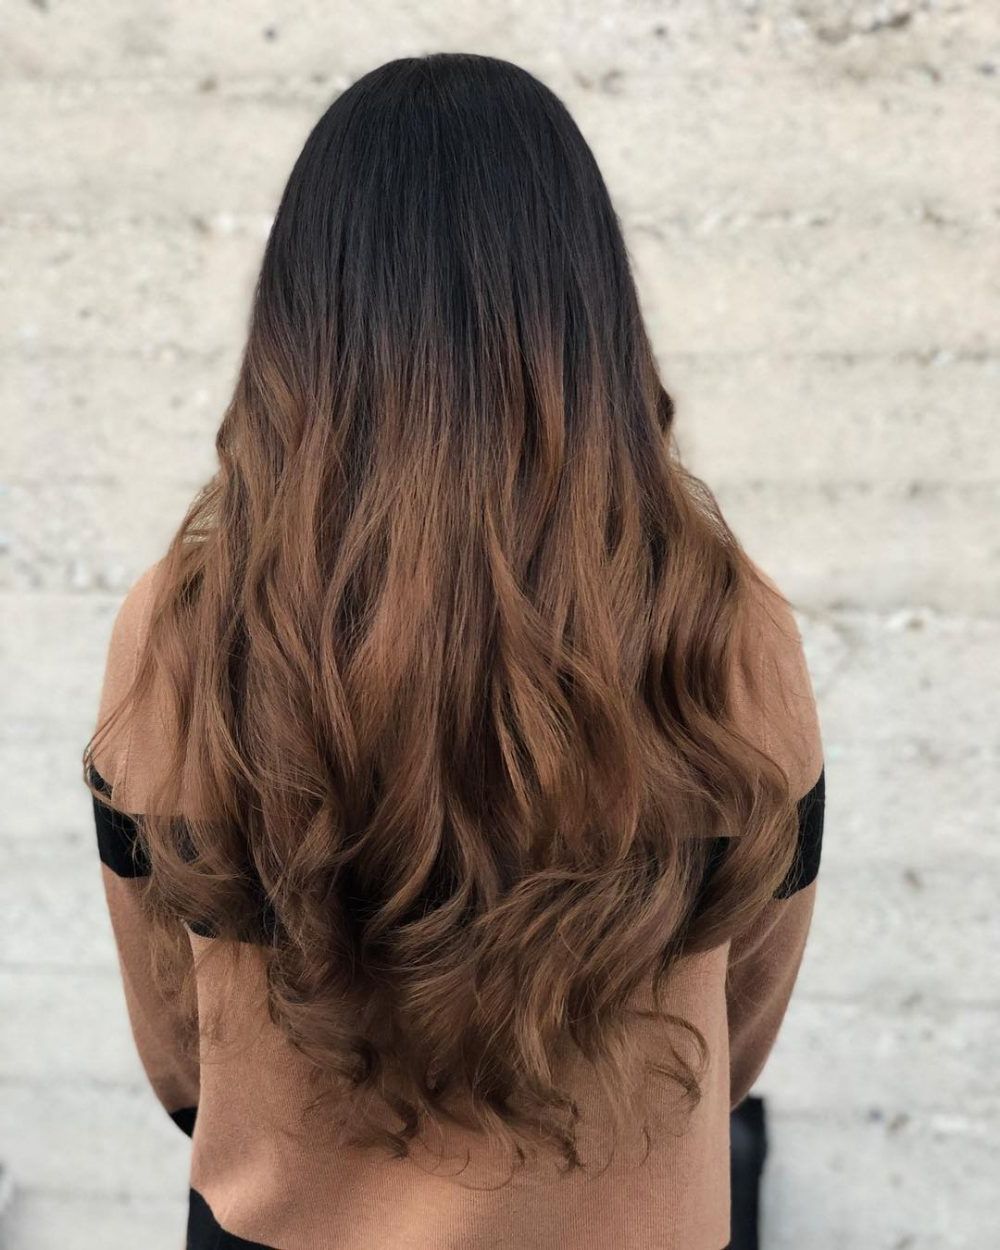 23 Long Ombre Hair Ideas Blowing Up In 2019 Intended For Trendy Long Layered Ombre Hairstyles (View 19 of 20)